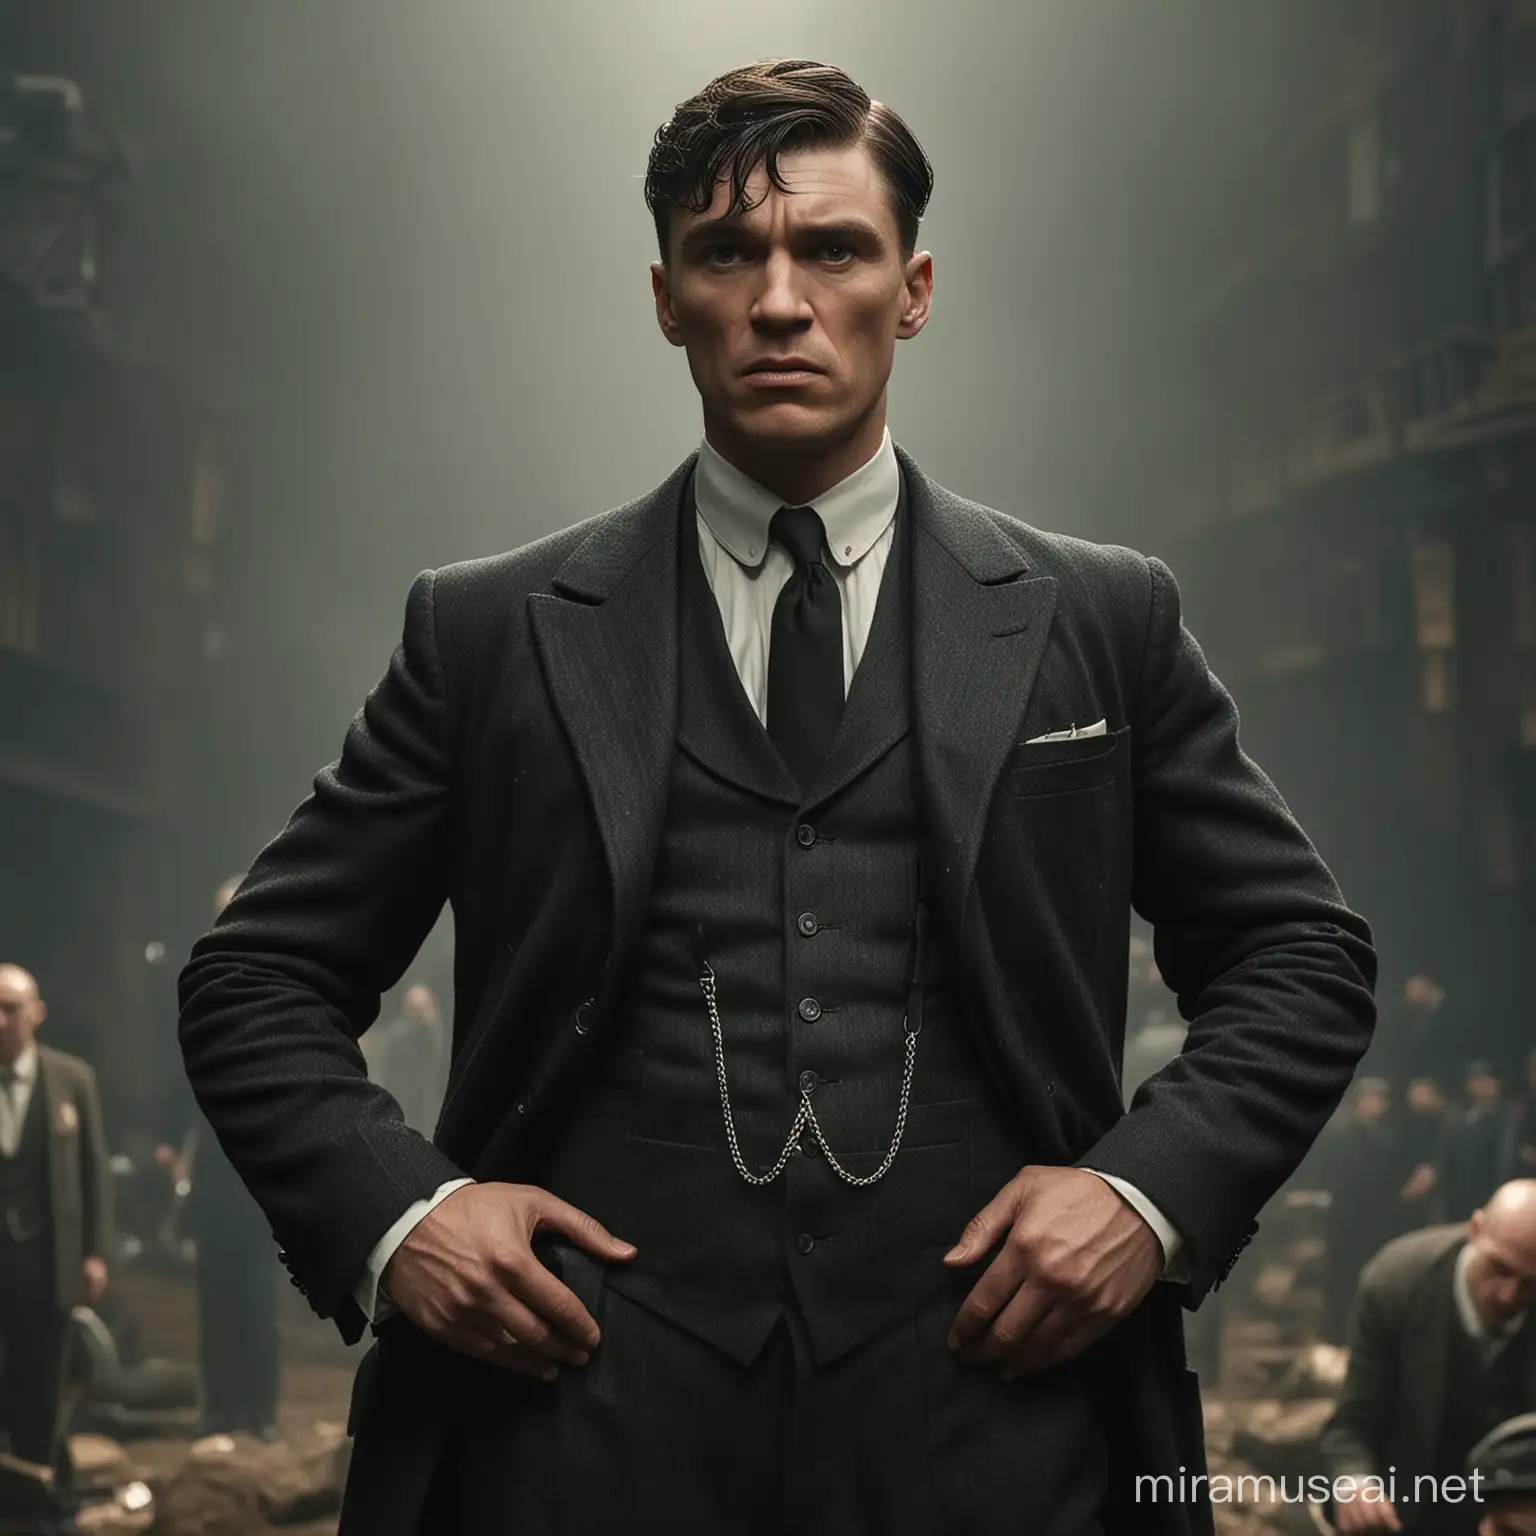 generate Thomas shelby (actor)  from peakt blinders, who is standing  in dominante He has his hands on his hips pose and dont care what others thinking about on him, make good face expression and do so realistic.